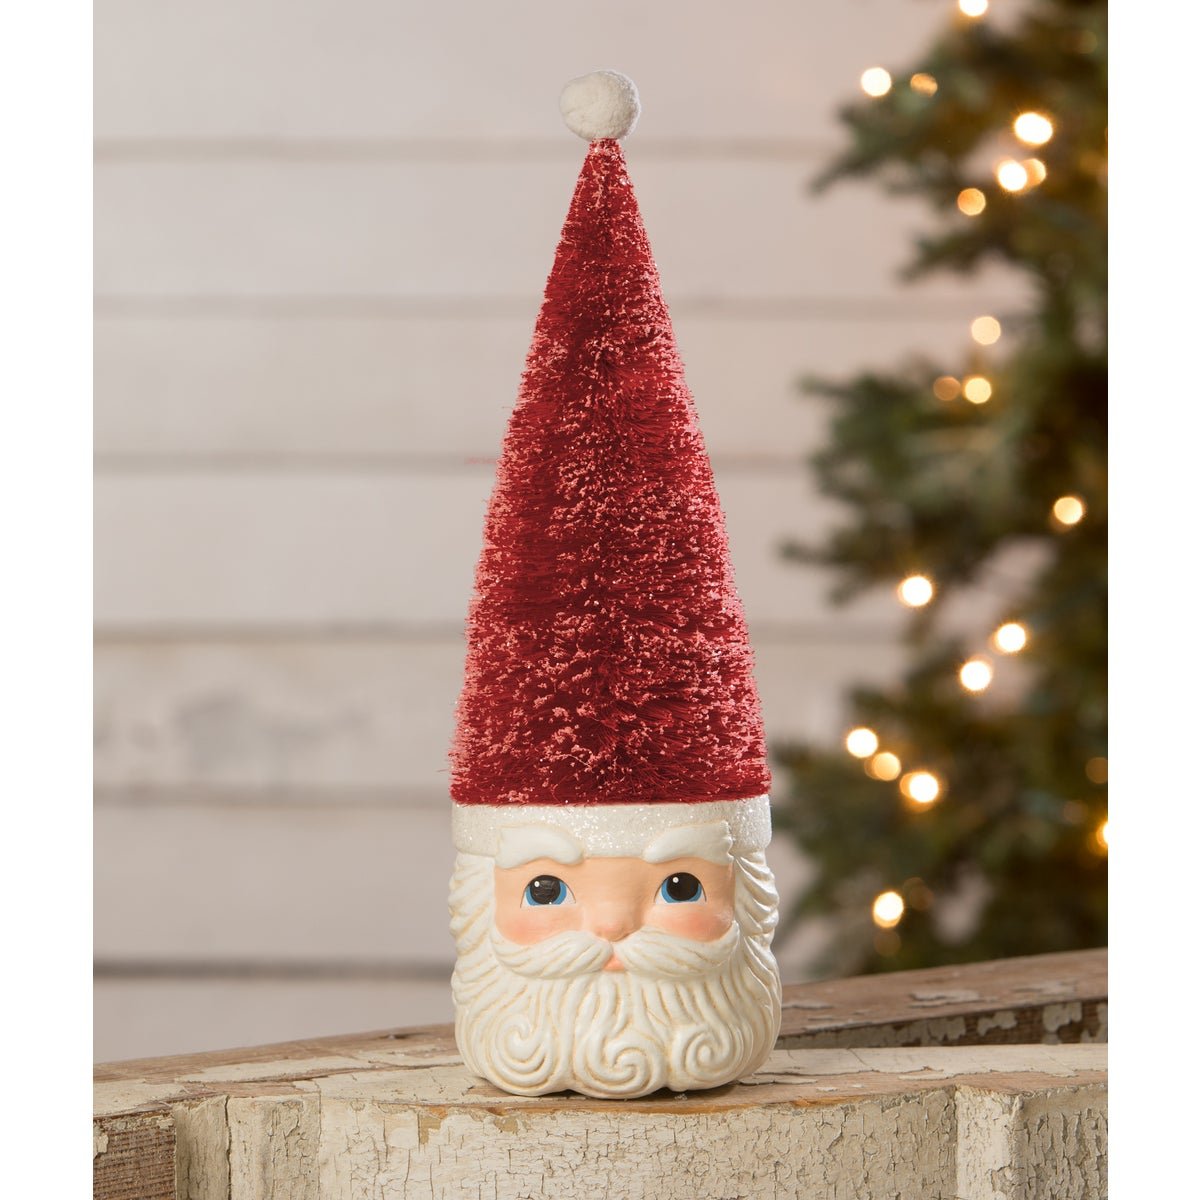 Bethany Lowe Christmas Bottle Brush Santa Red TL2364 - The Primitive Pineapple Collection